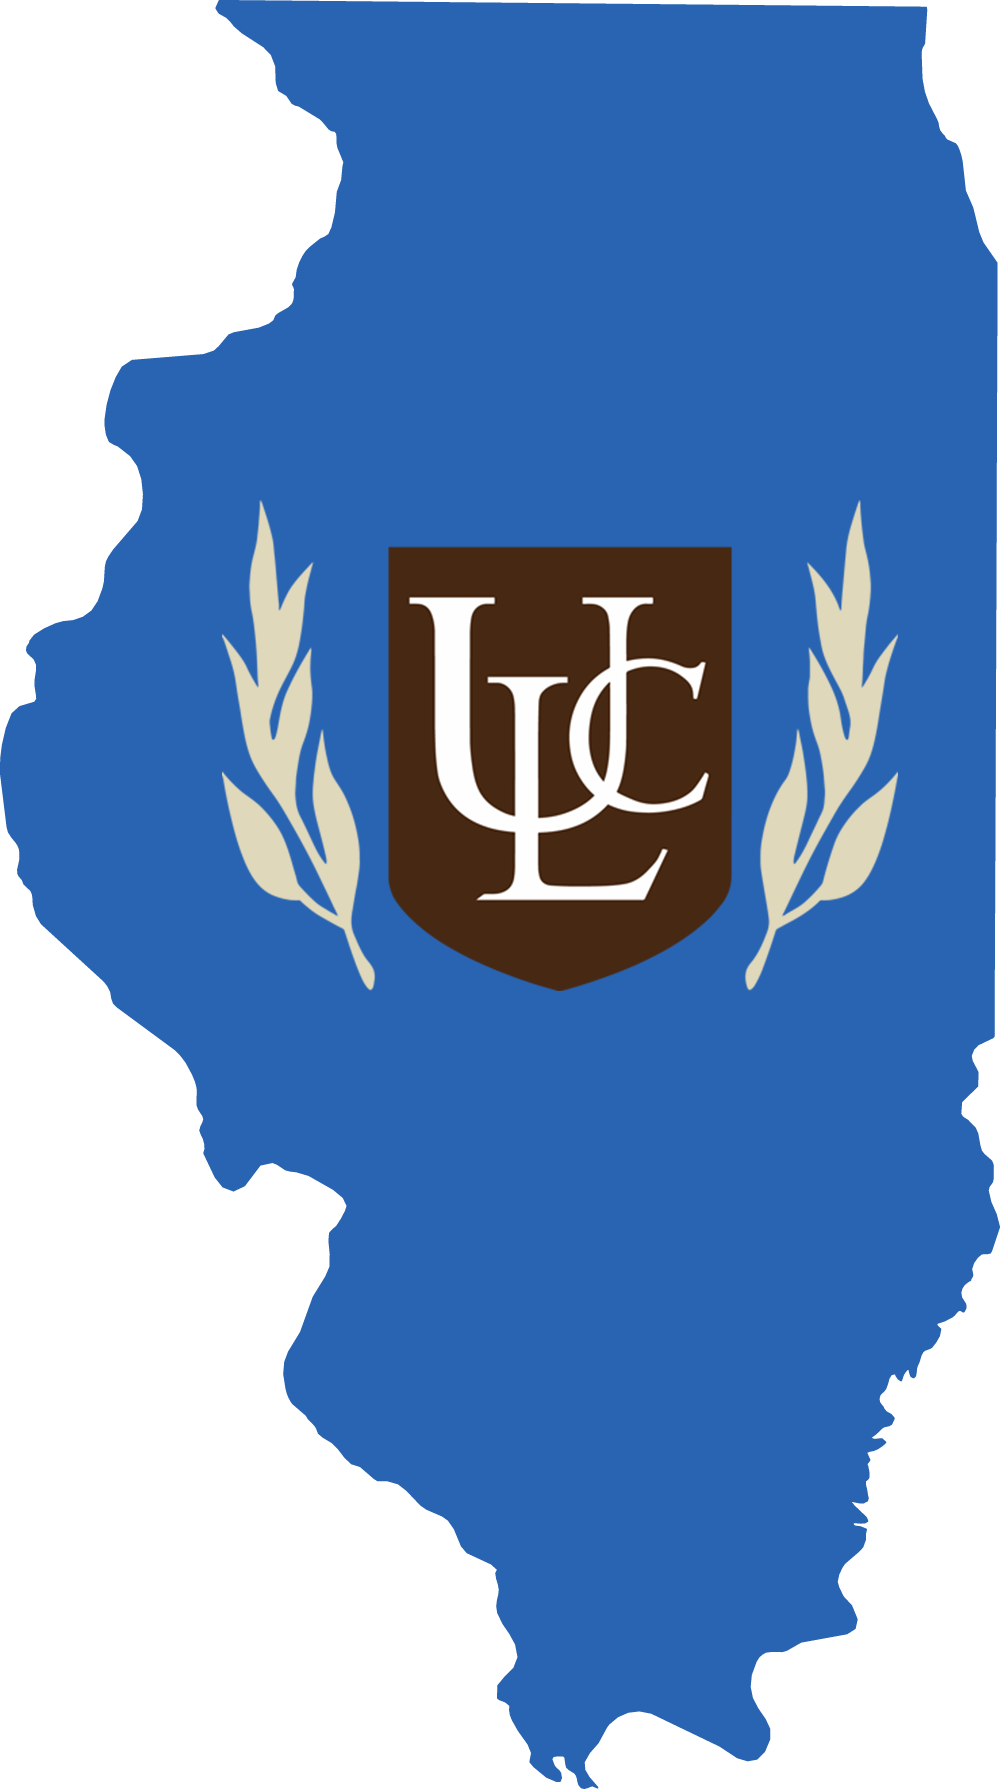 An outline of Illinois with the ULC logo